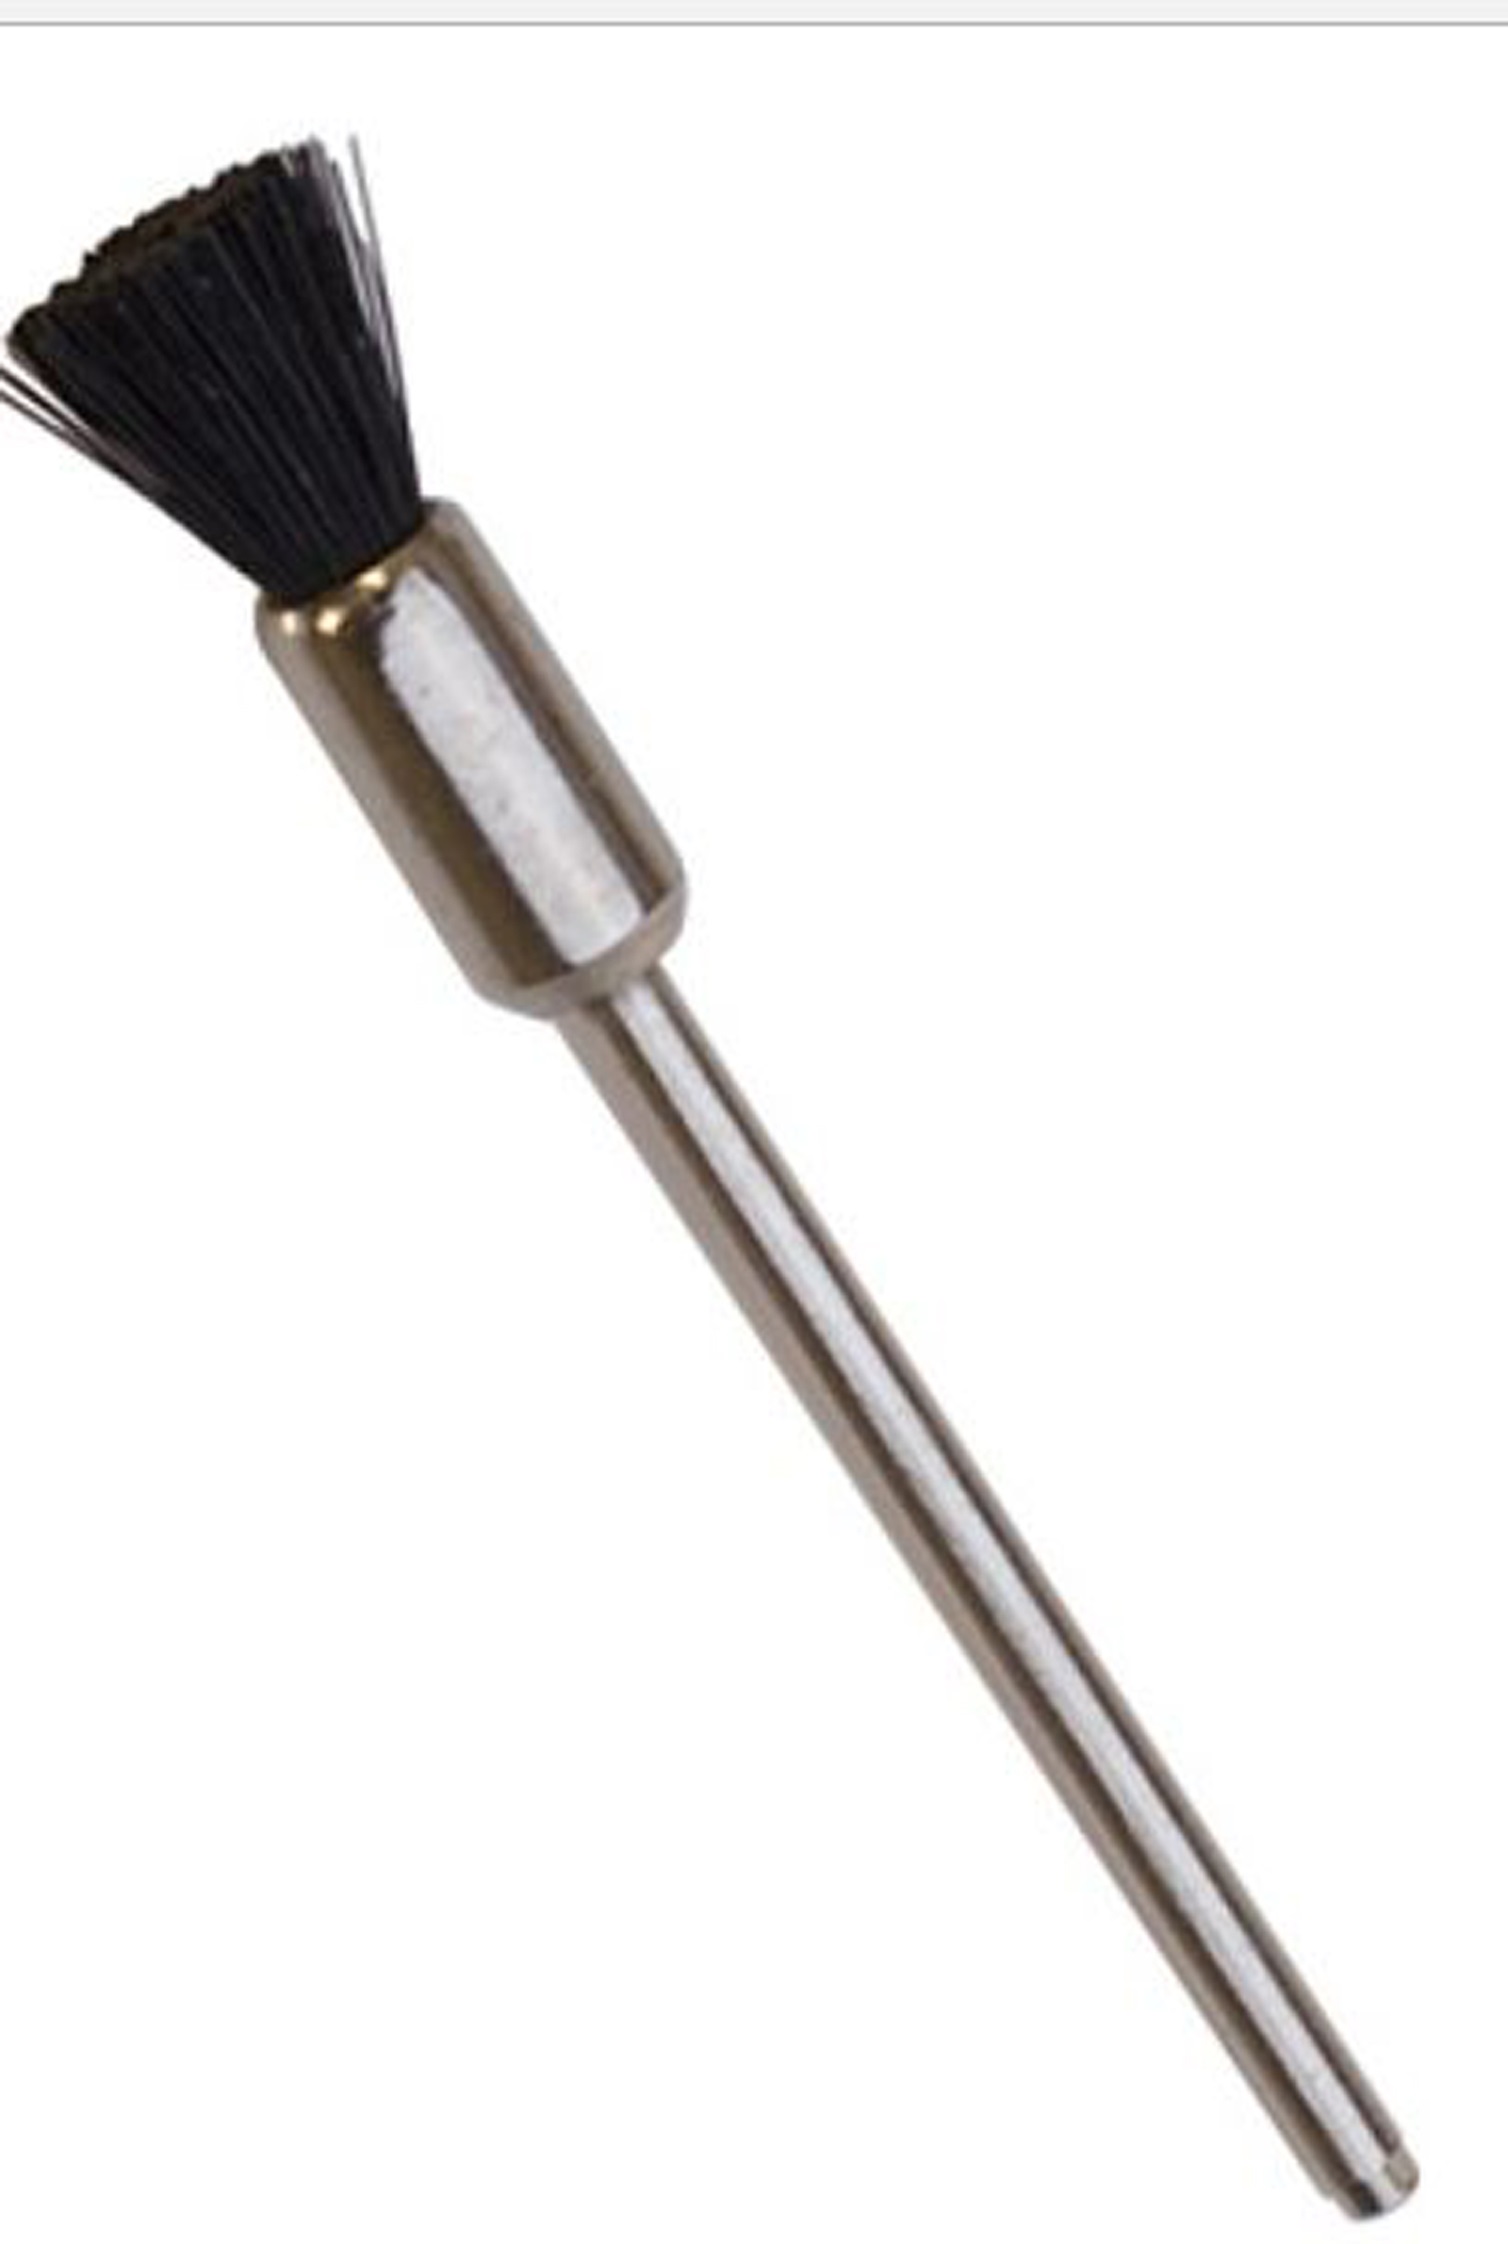 MINIATURE END BRUSH, MOUNTED on a 3/32" (2.3mm) mandrel , sold in packs of 12